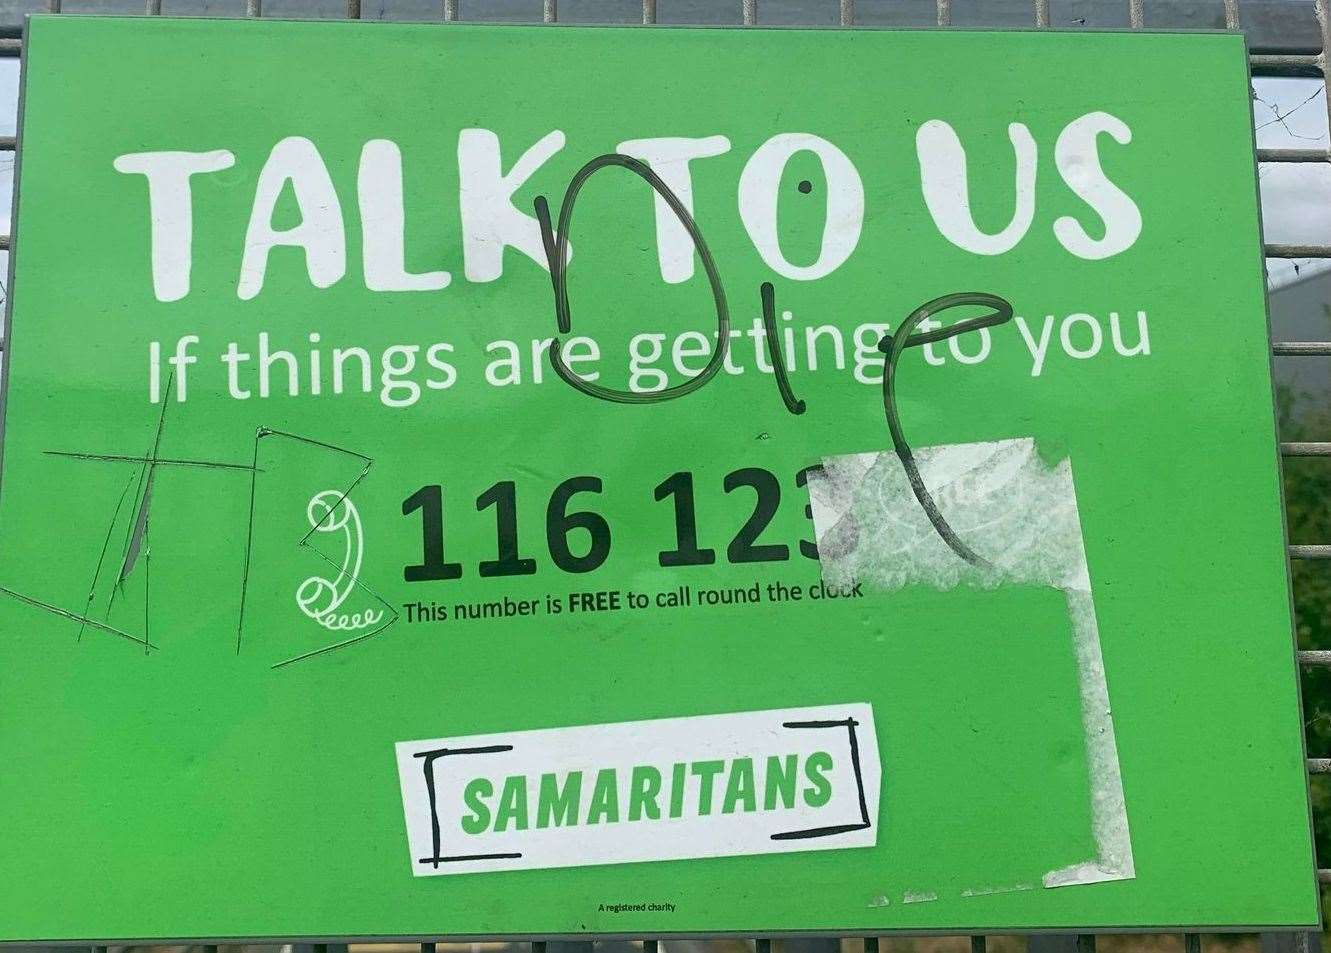 The Samaritans offer support to those in emotional distress